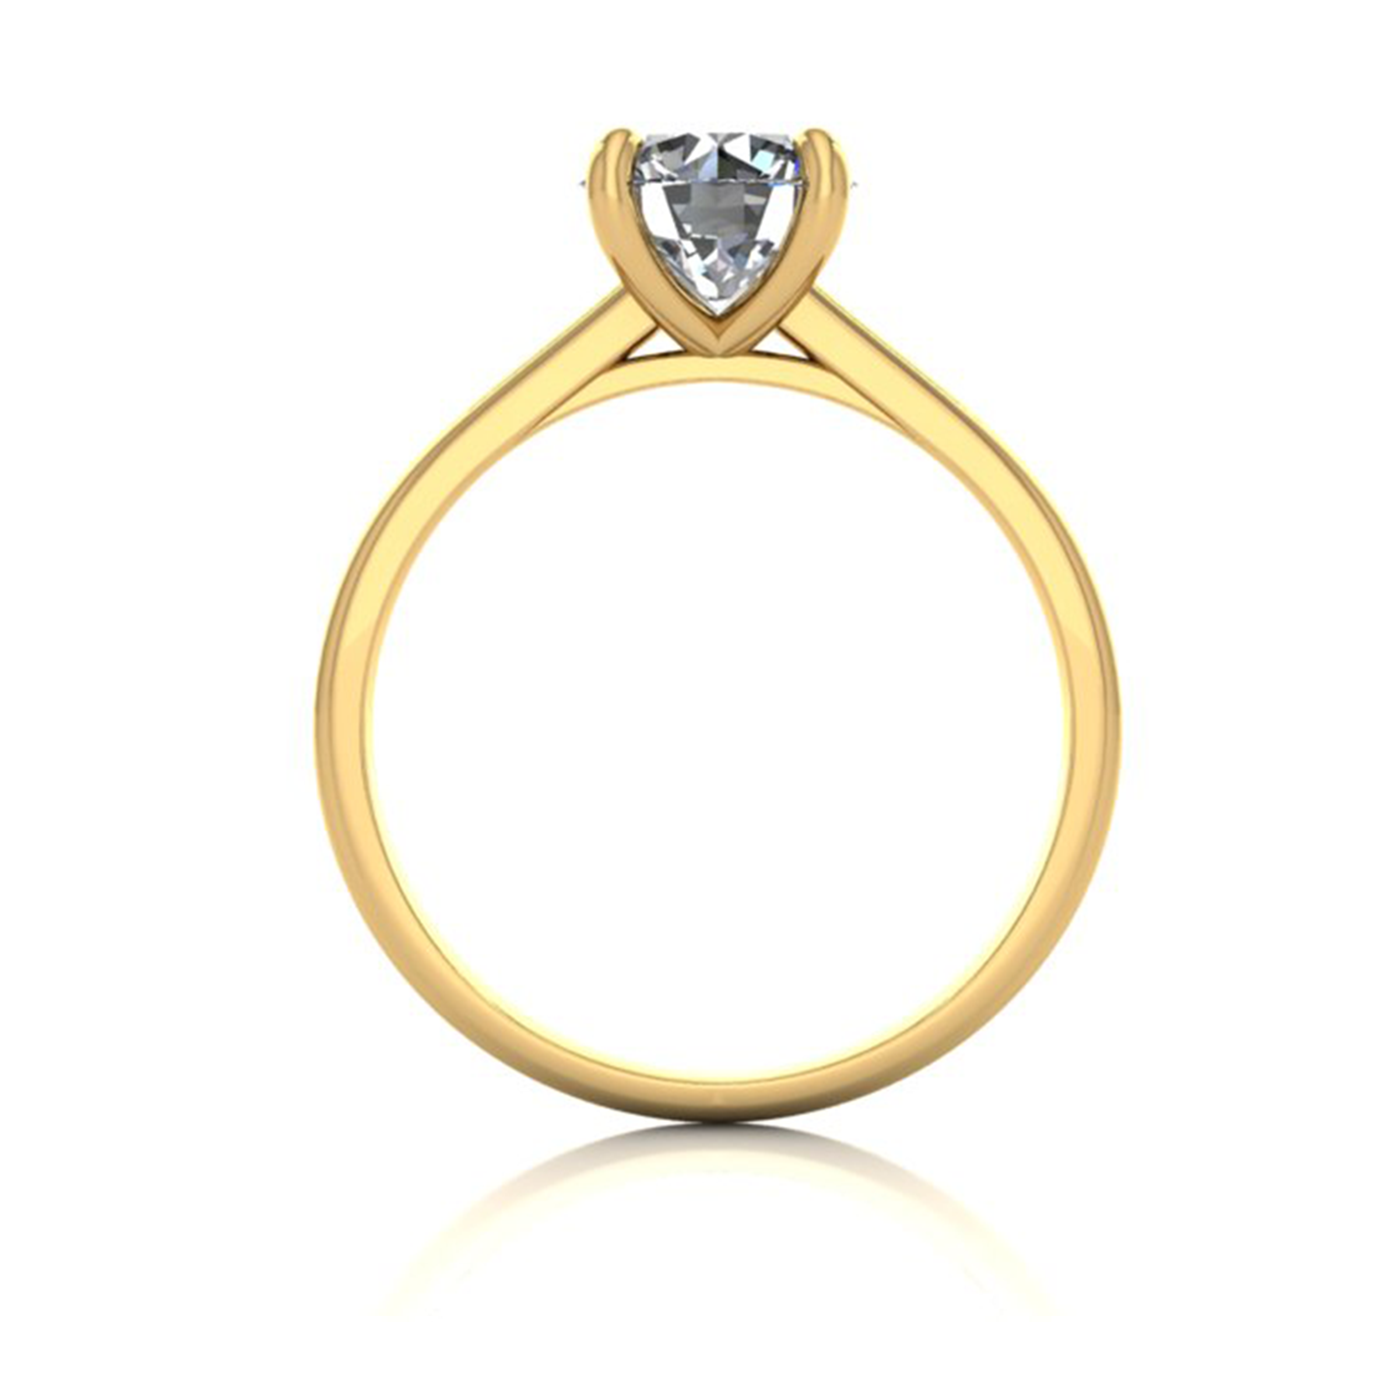 18k yellow gold 1.2ct 4 prongs solitaire round cut diamond engagement ring with whisper thin band